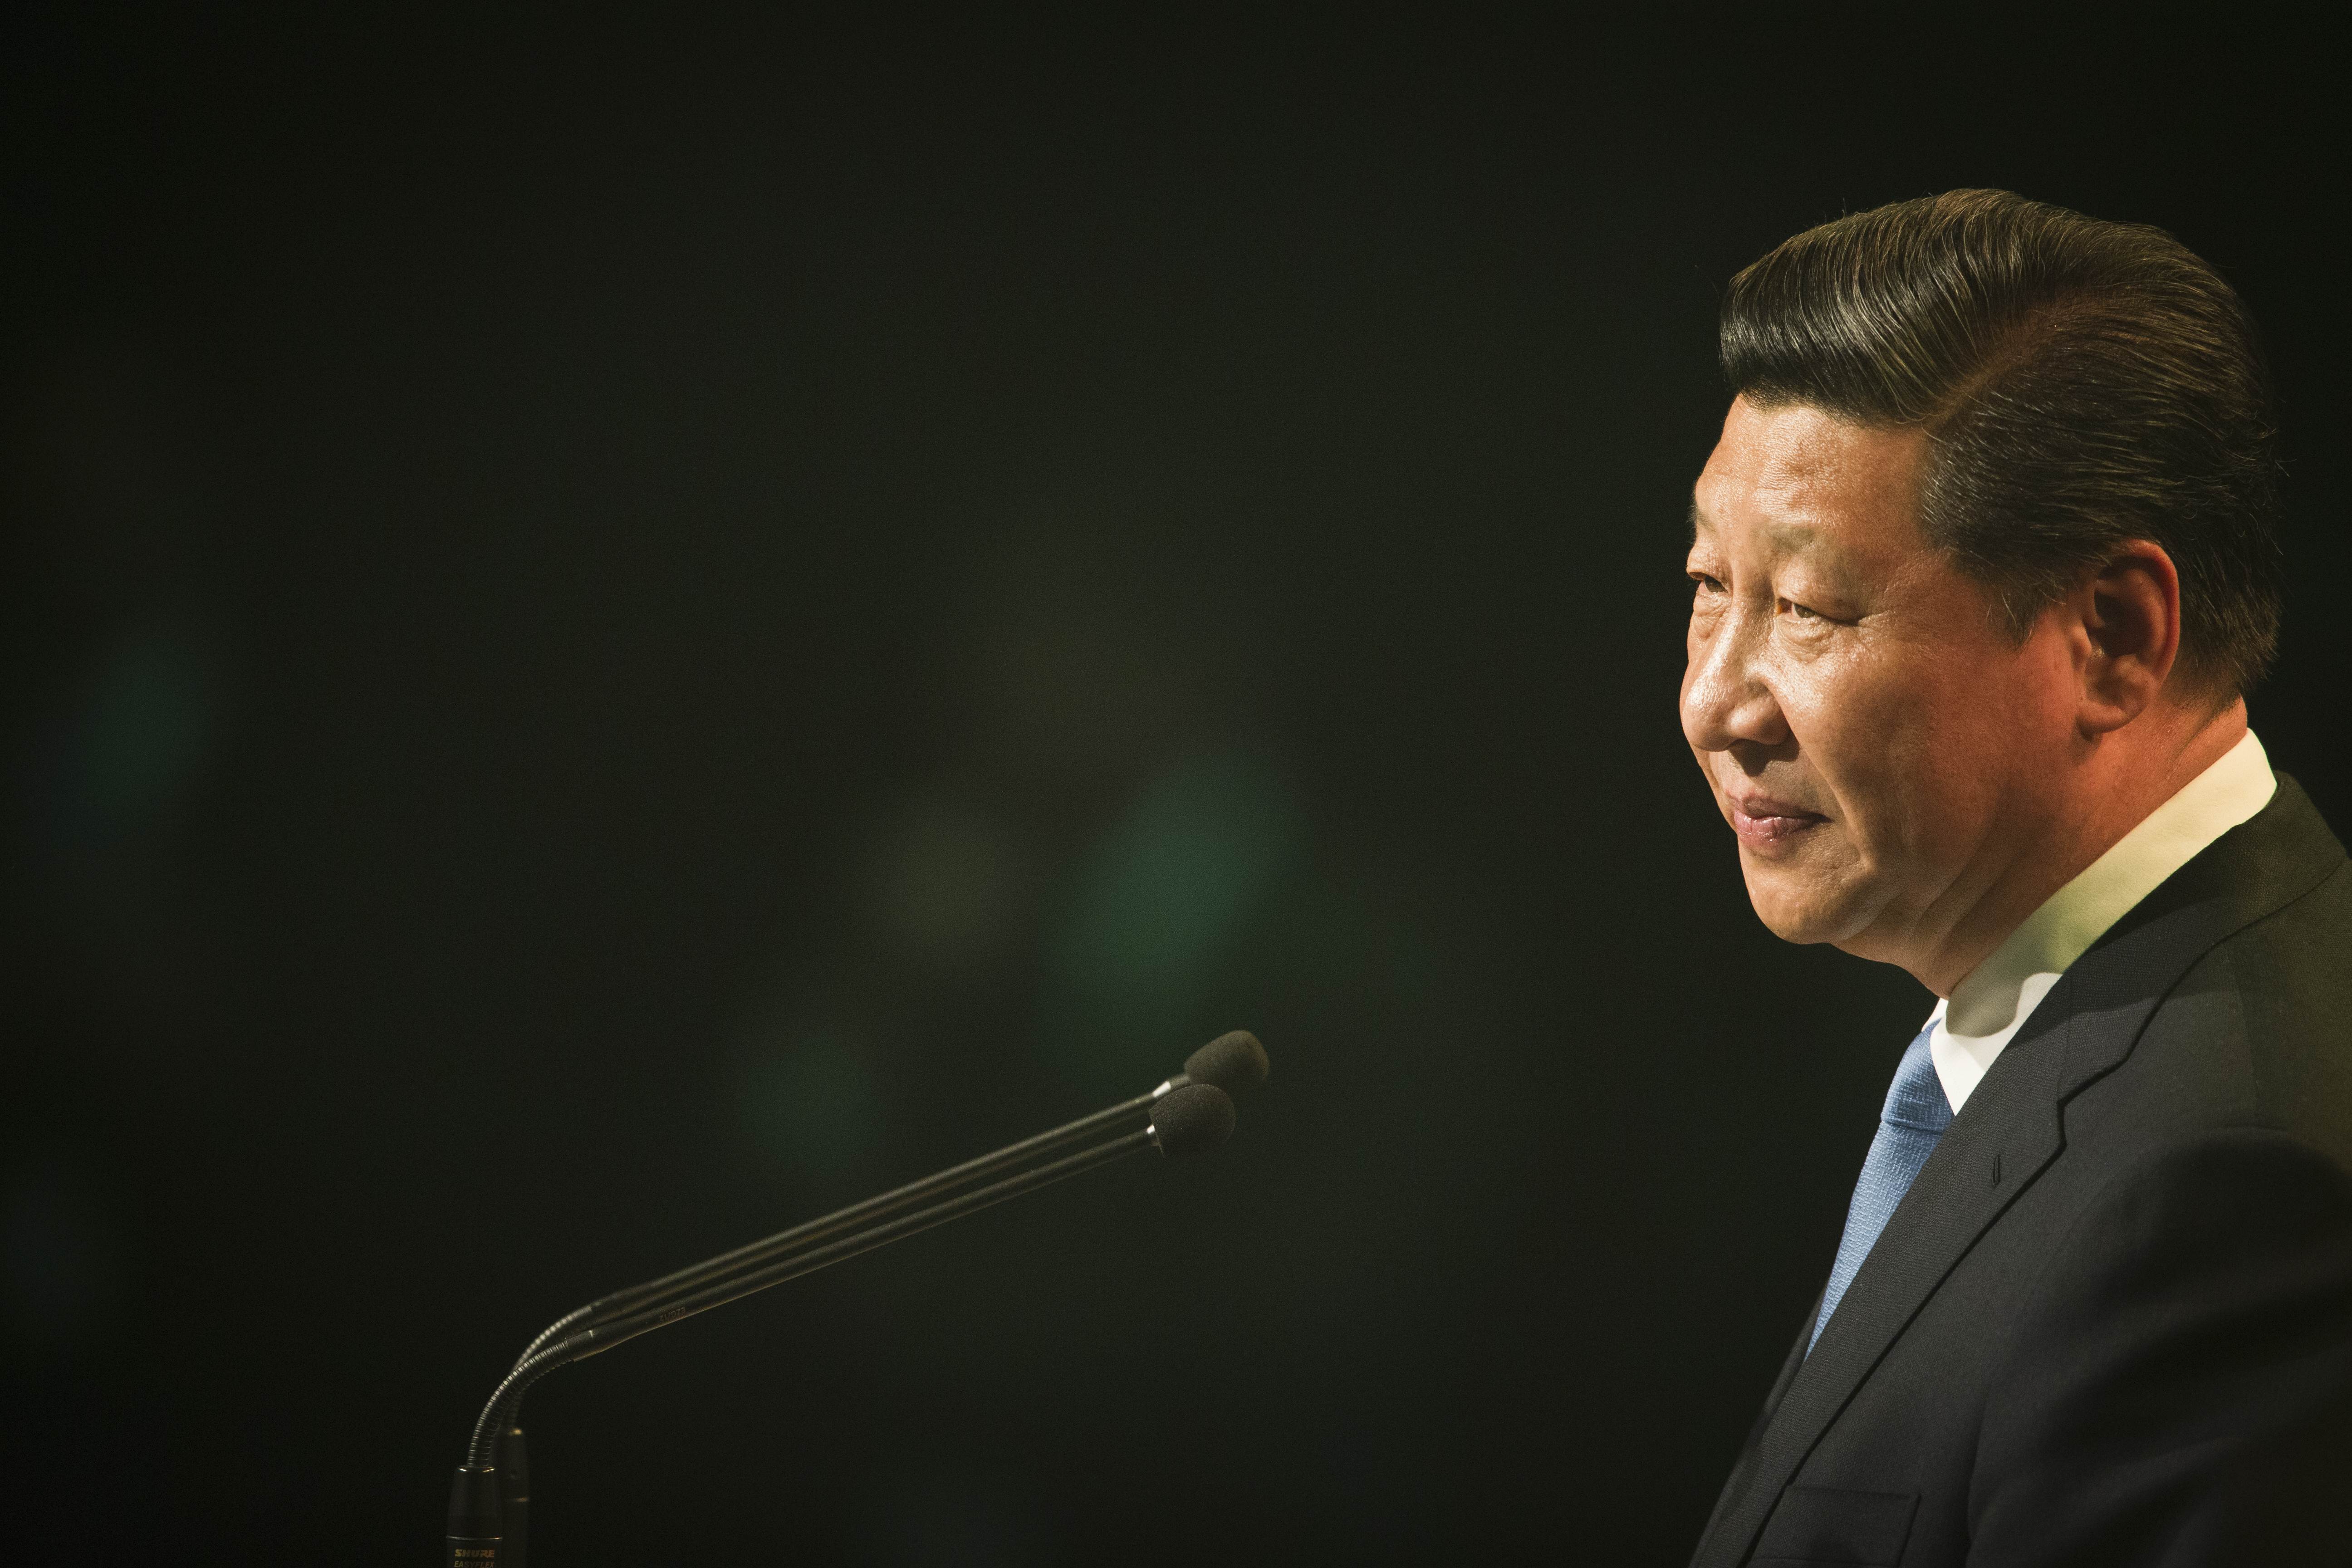 President Xi Jinping's determined leadership can overcome vested interests and implement the needed reforms. Photo: AFP